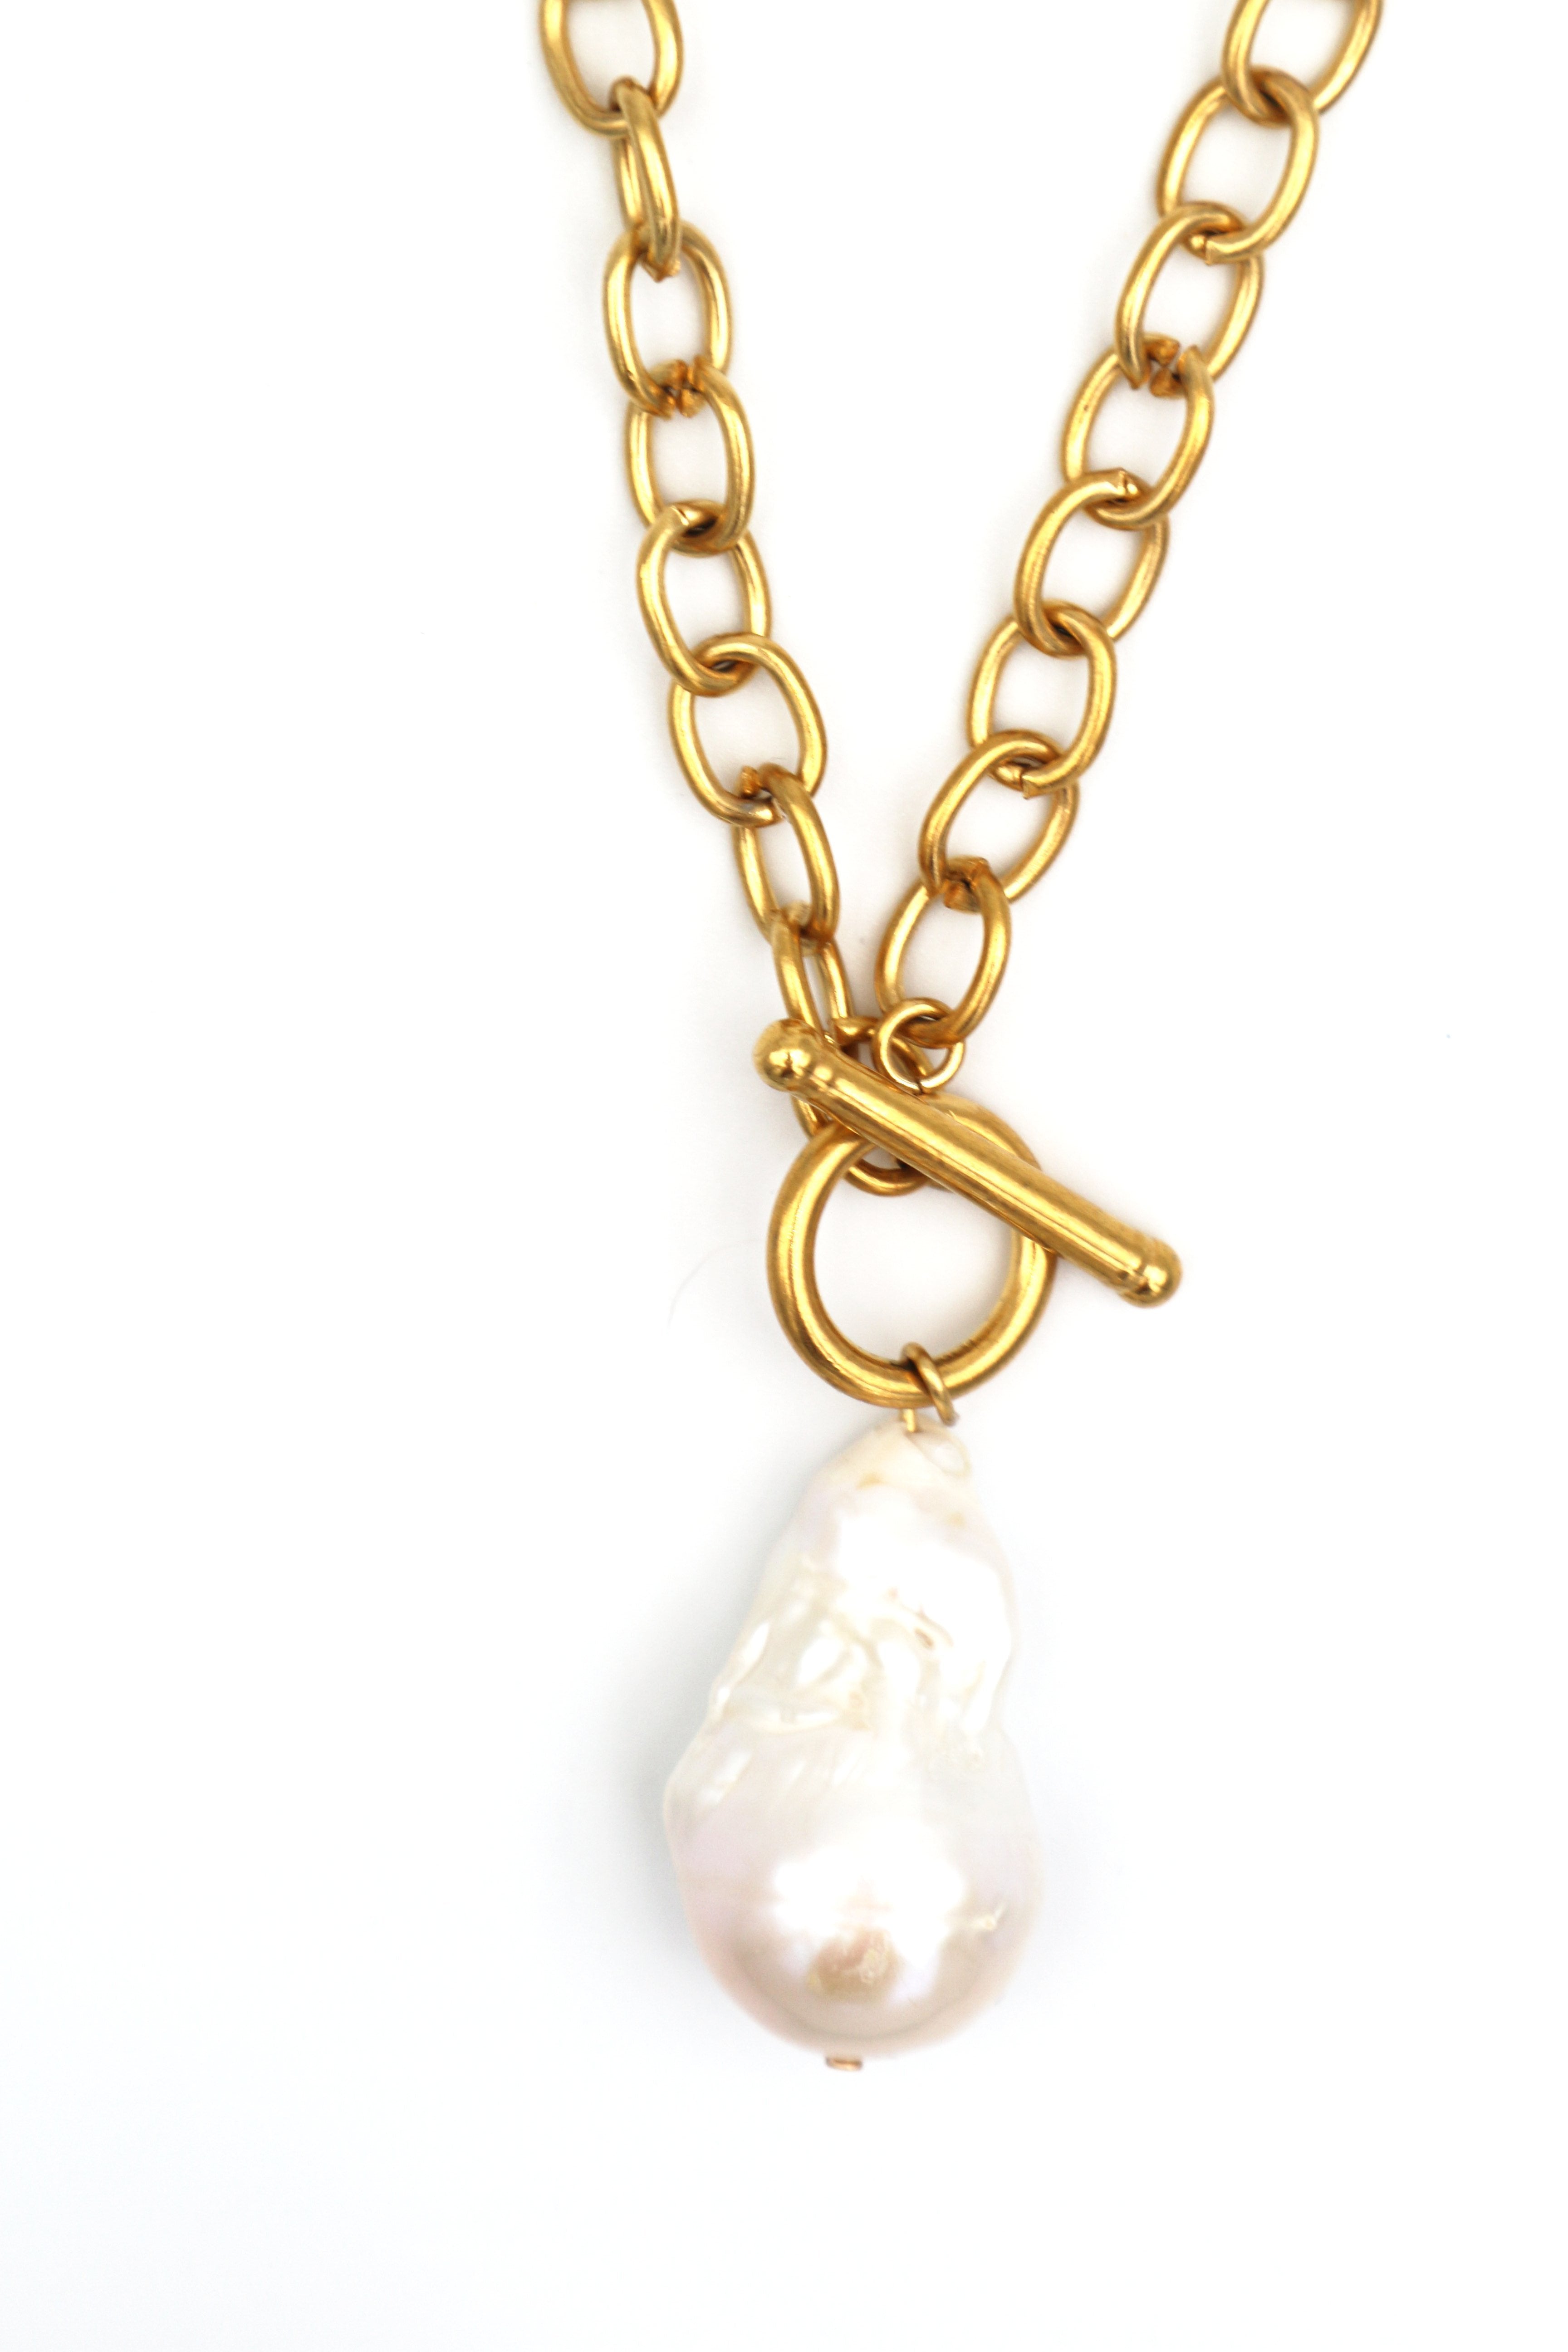 IRIS // The Baroque Pearl Necklace